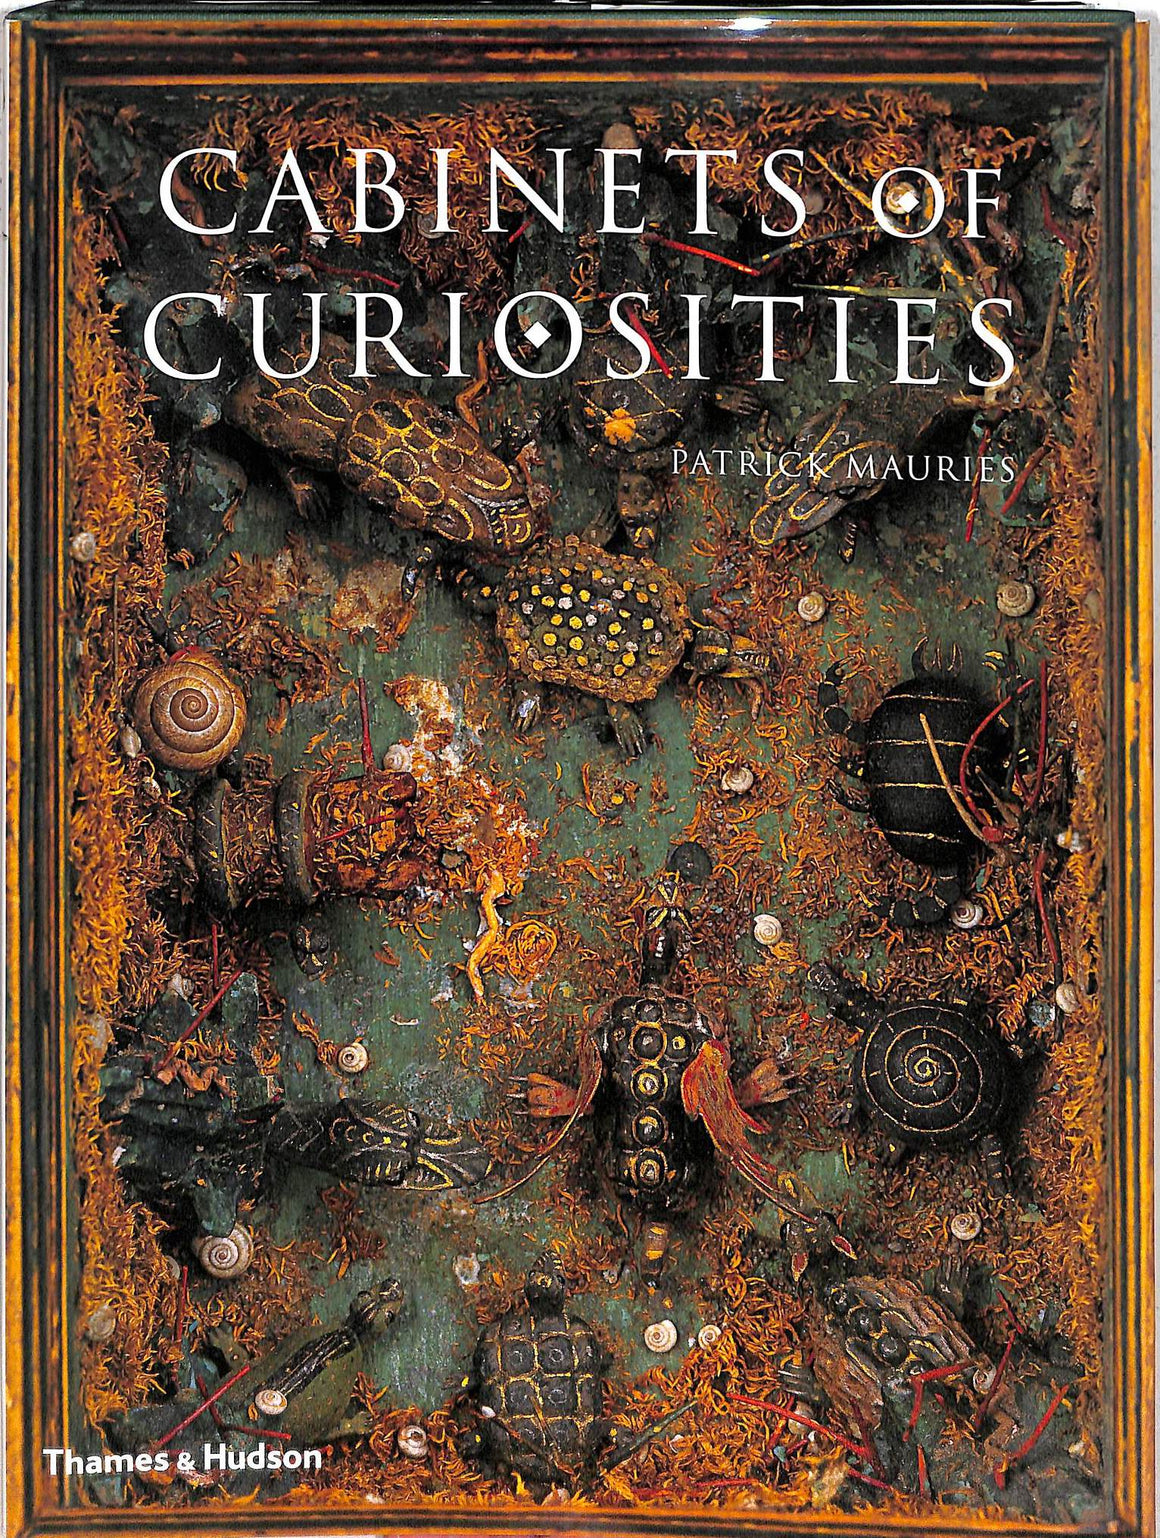 "Cabinets Of Curiosities" 2002 MAURIES, Patrick